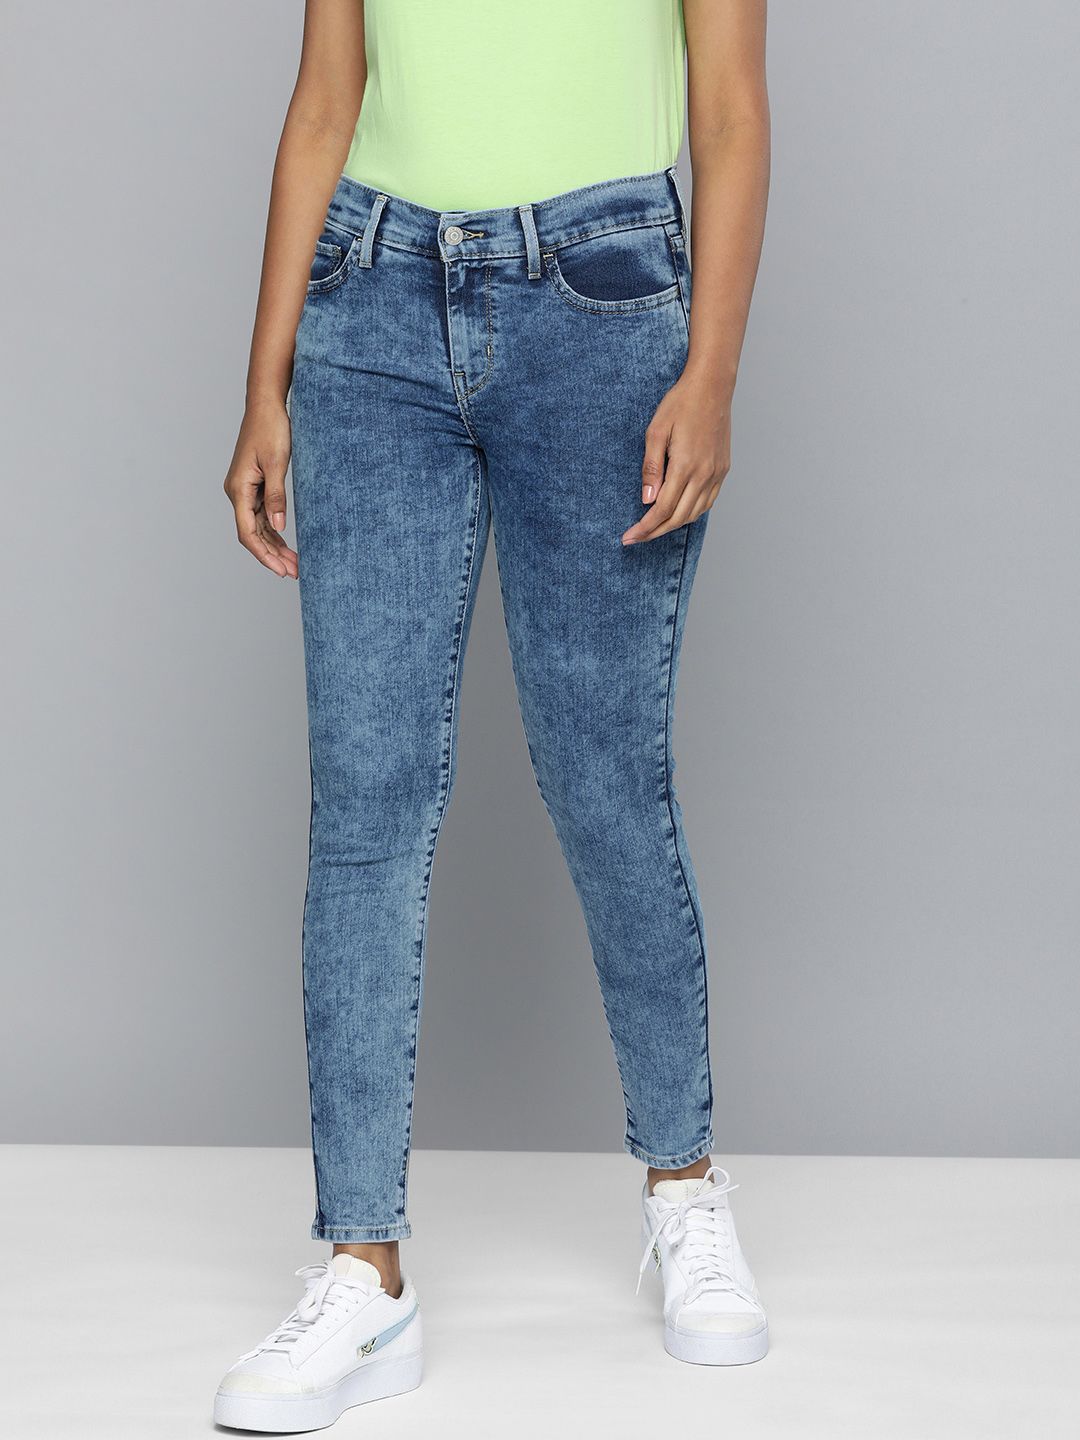 Levis Women Blue 710 Super Skinny Fit Light Fade Stretchable Jeans Price in India